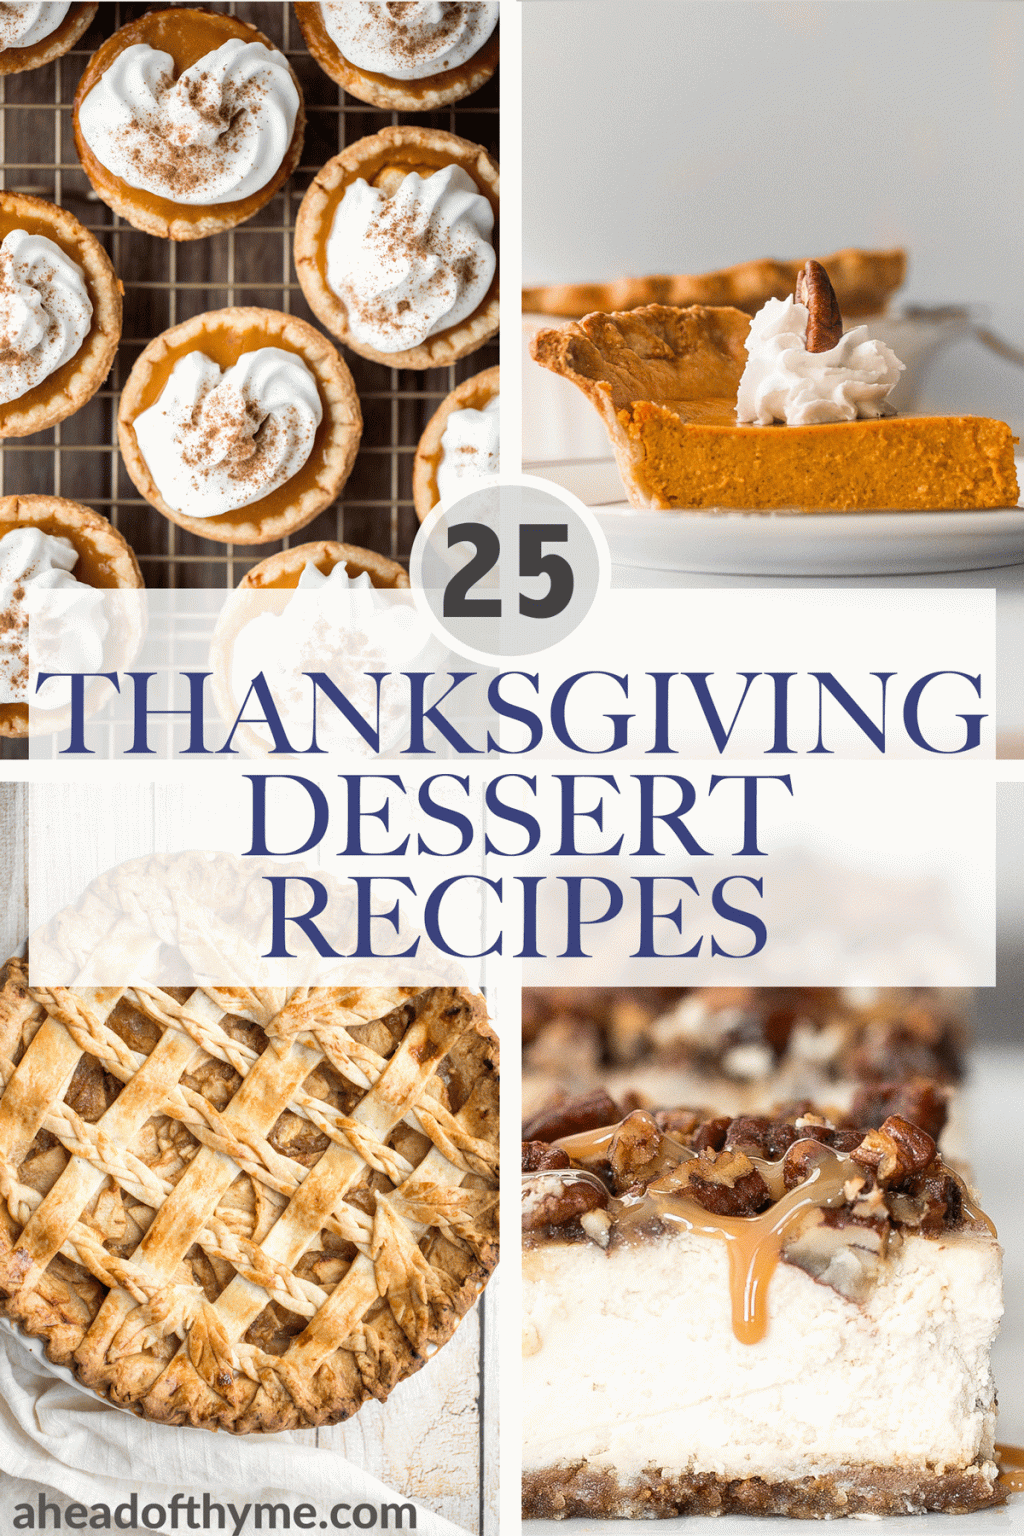 25 Best Thanksgiving Dessert Recipes - Ahead of Thyme